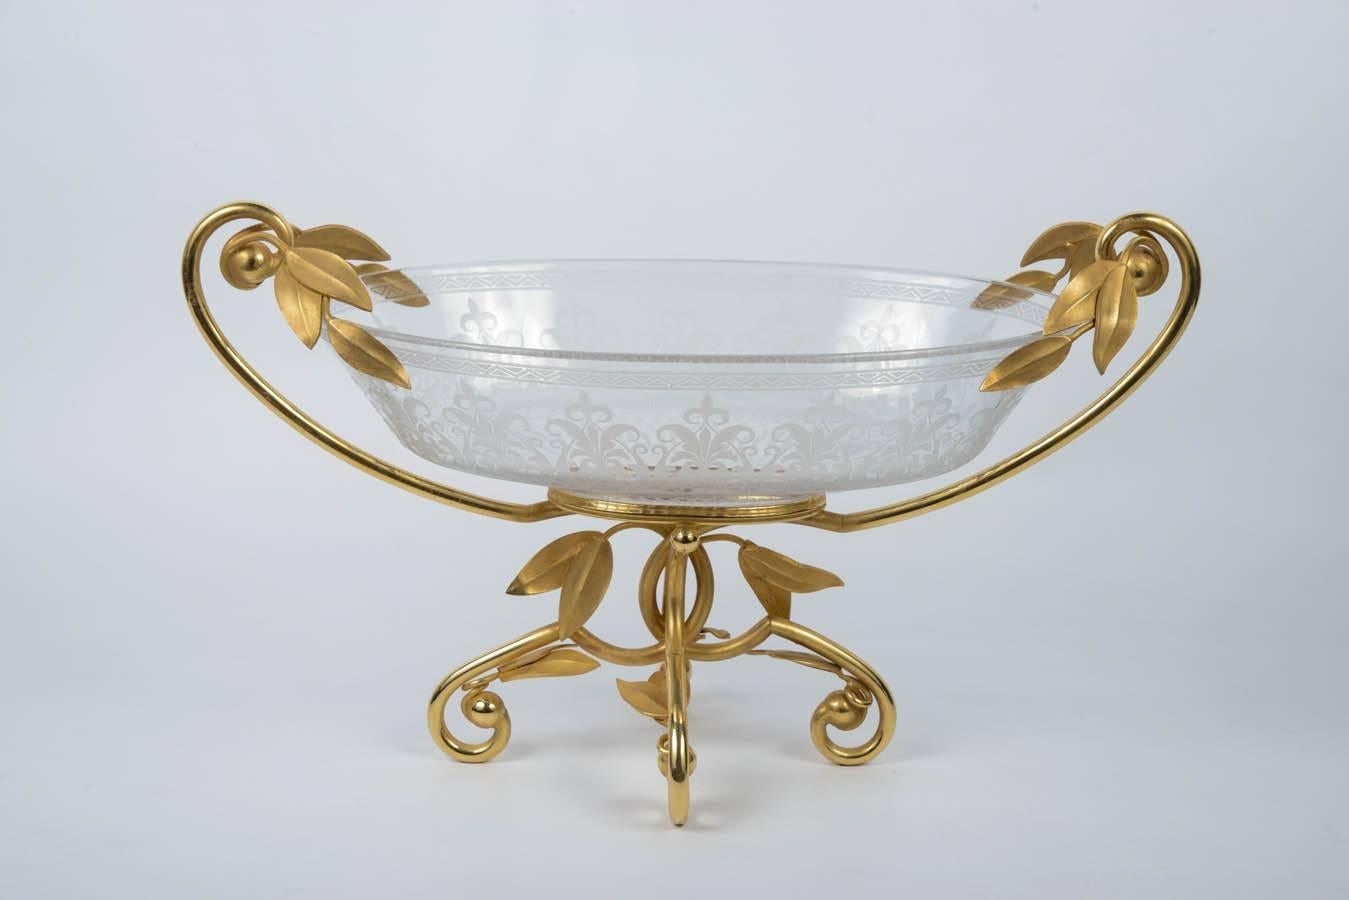 Cup in crystal engraved by the manfacture  of Saint-Louis carried by a gilded bronze frame.